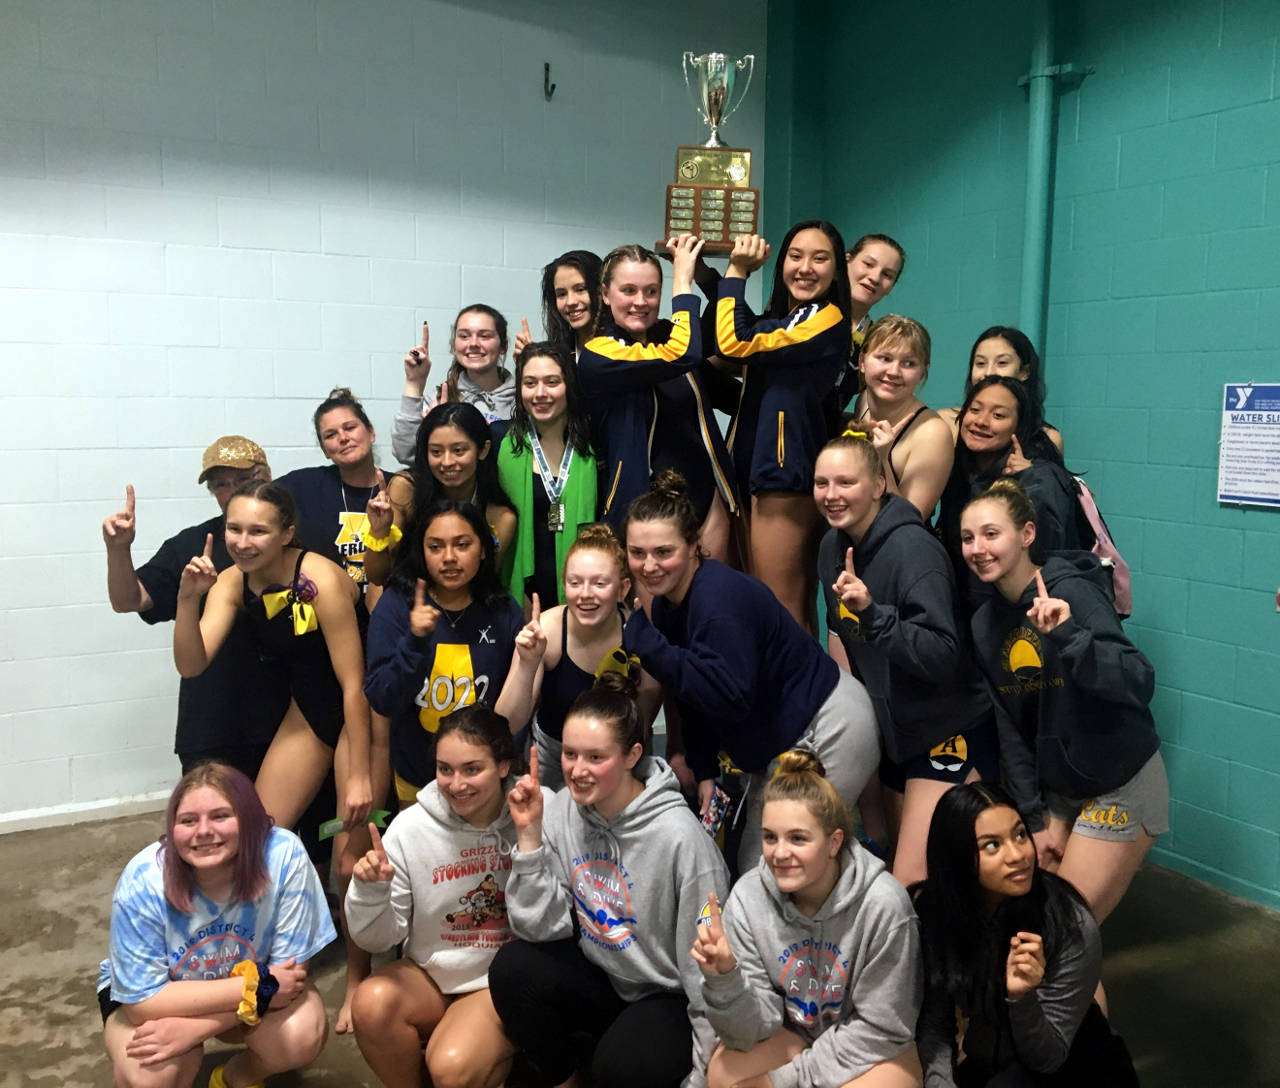 Aberdeen’s girls swim team won its seventh straight district championship on Saturday at the Grays Harbor YMCA. (Submitted photo)